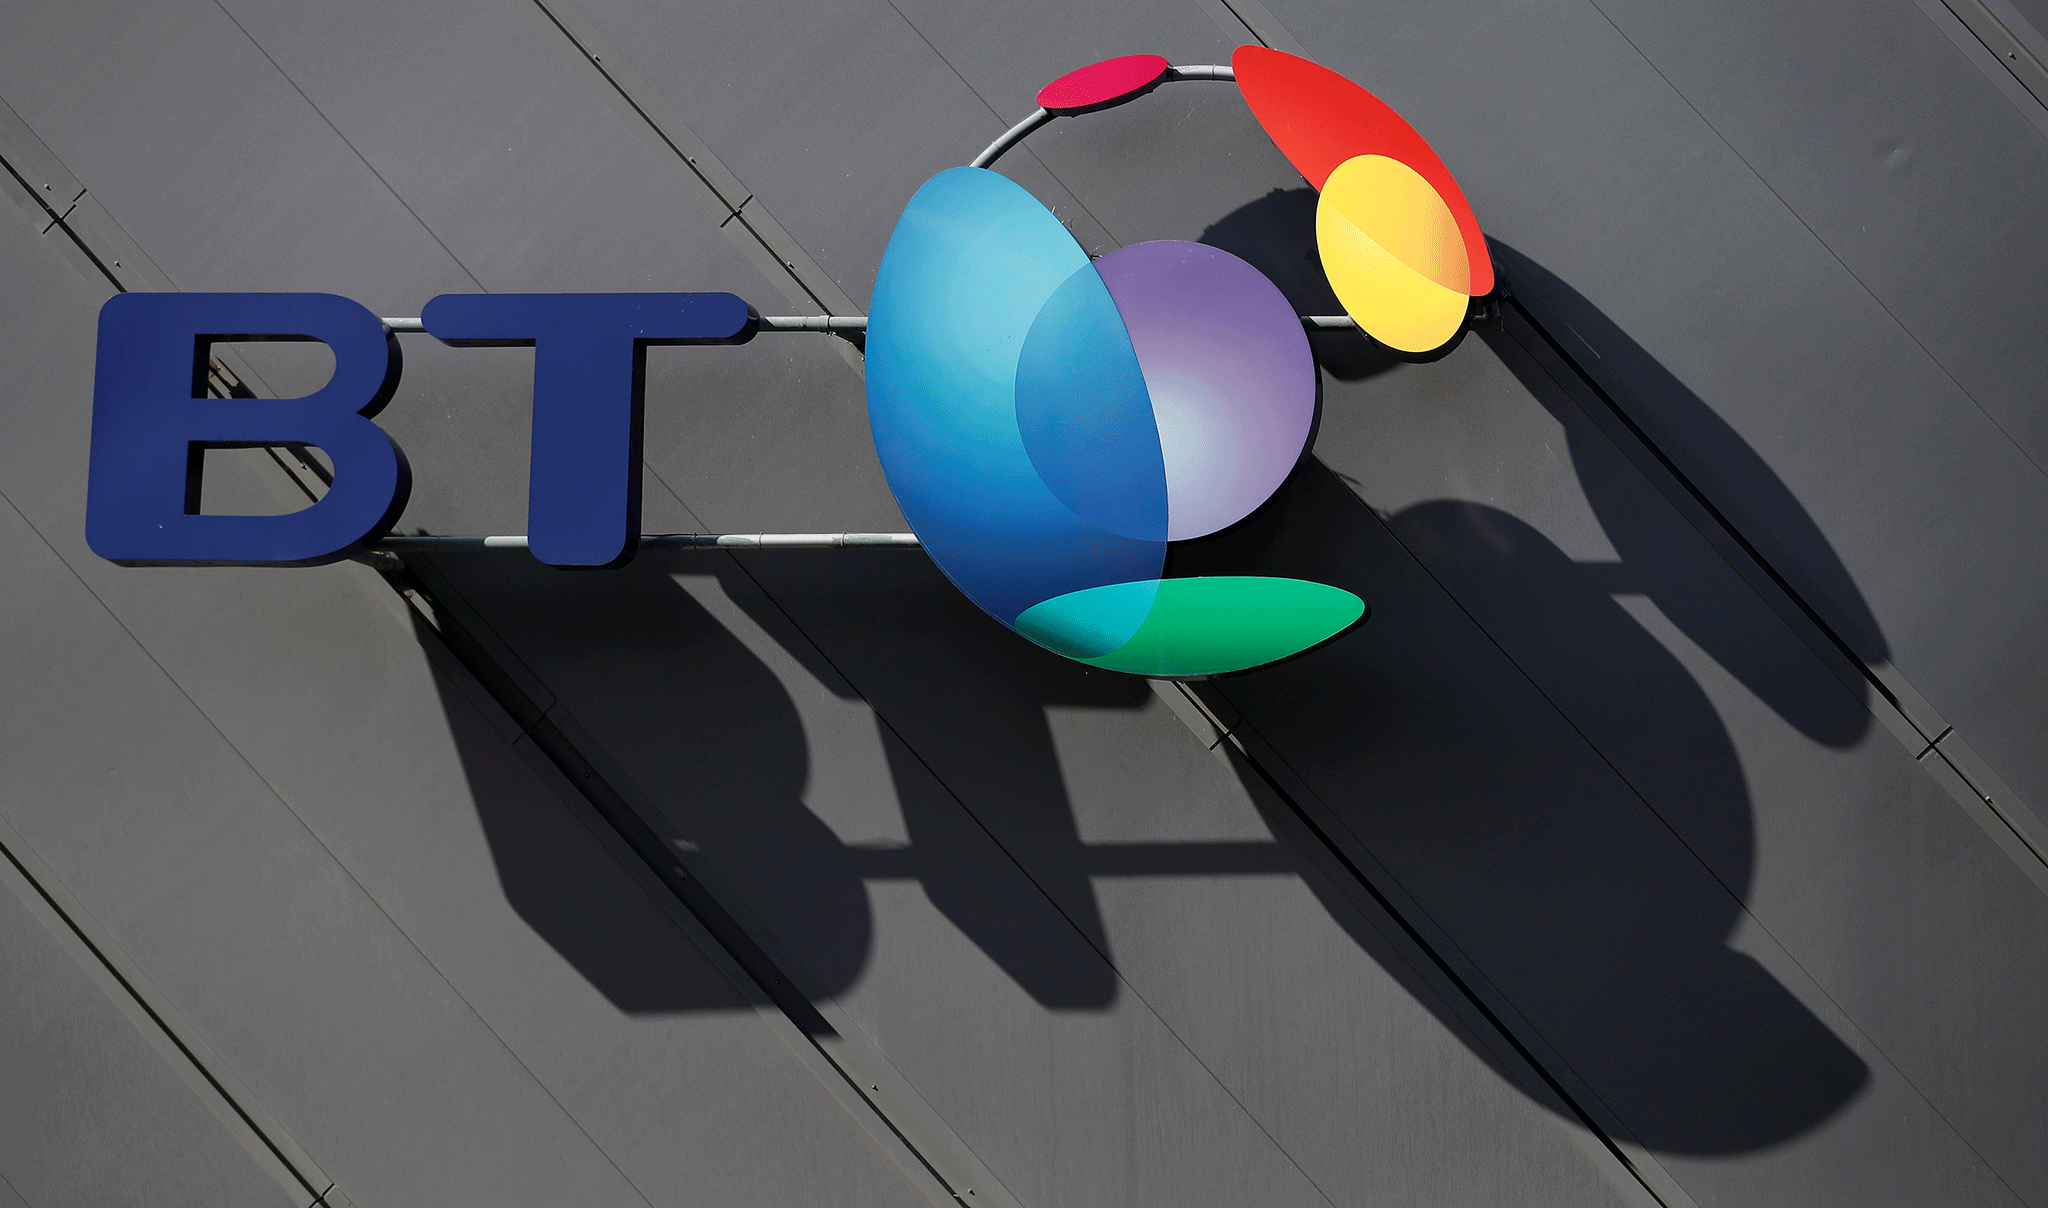 BT has struggled to persuade MPs and regulators that its ownership of the Openreach network does not hamper competition